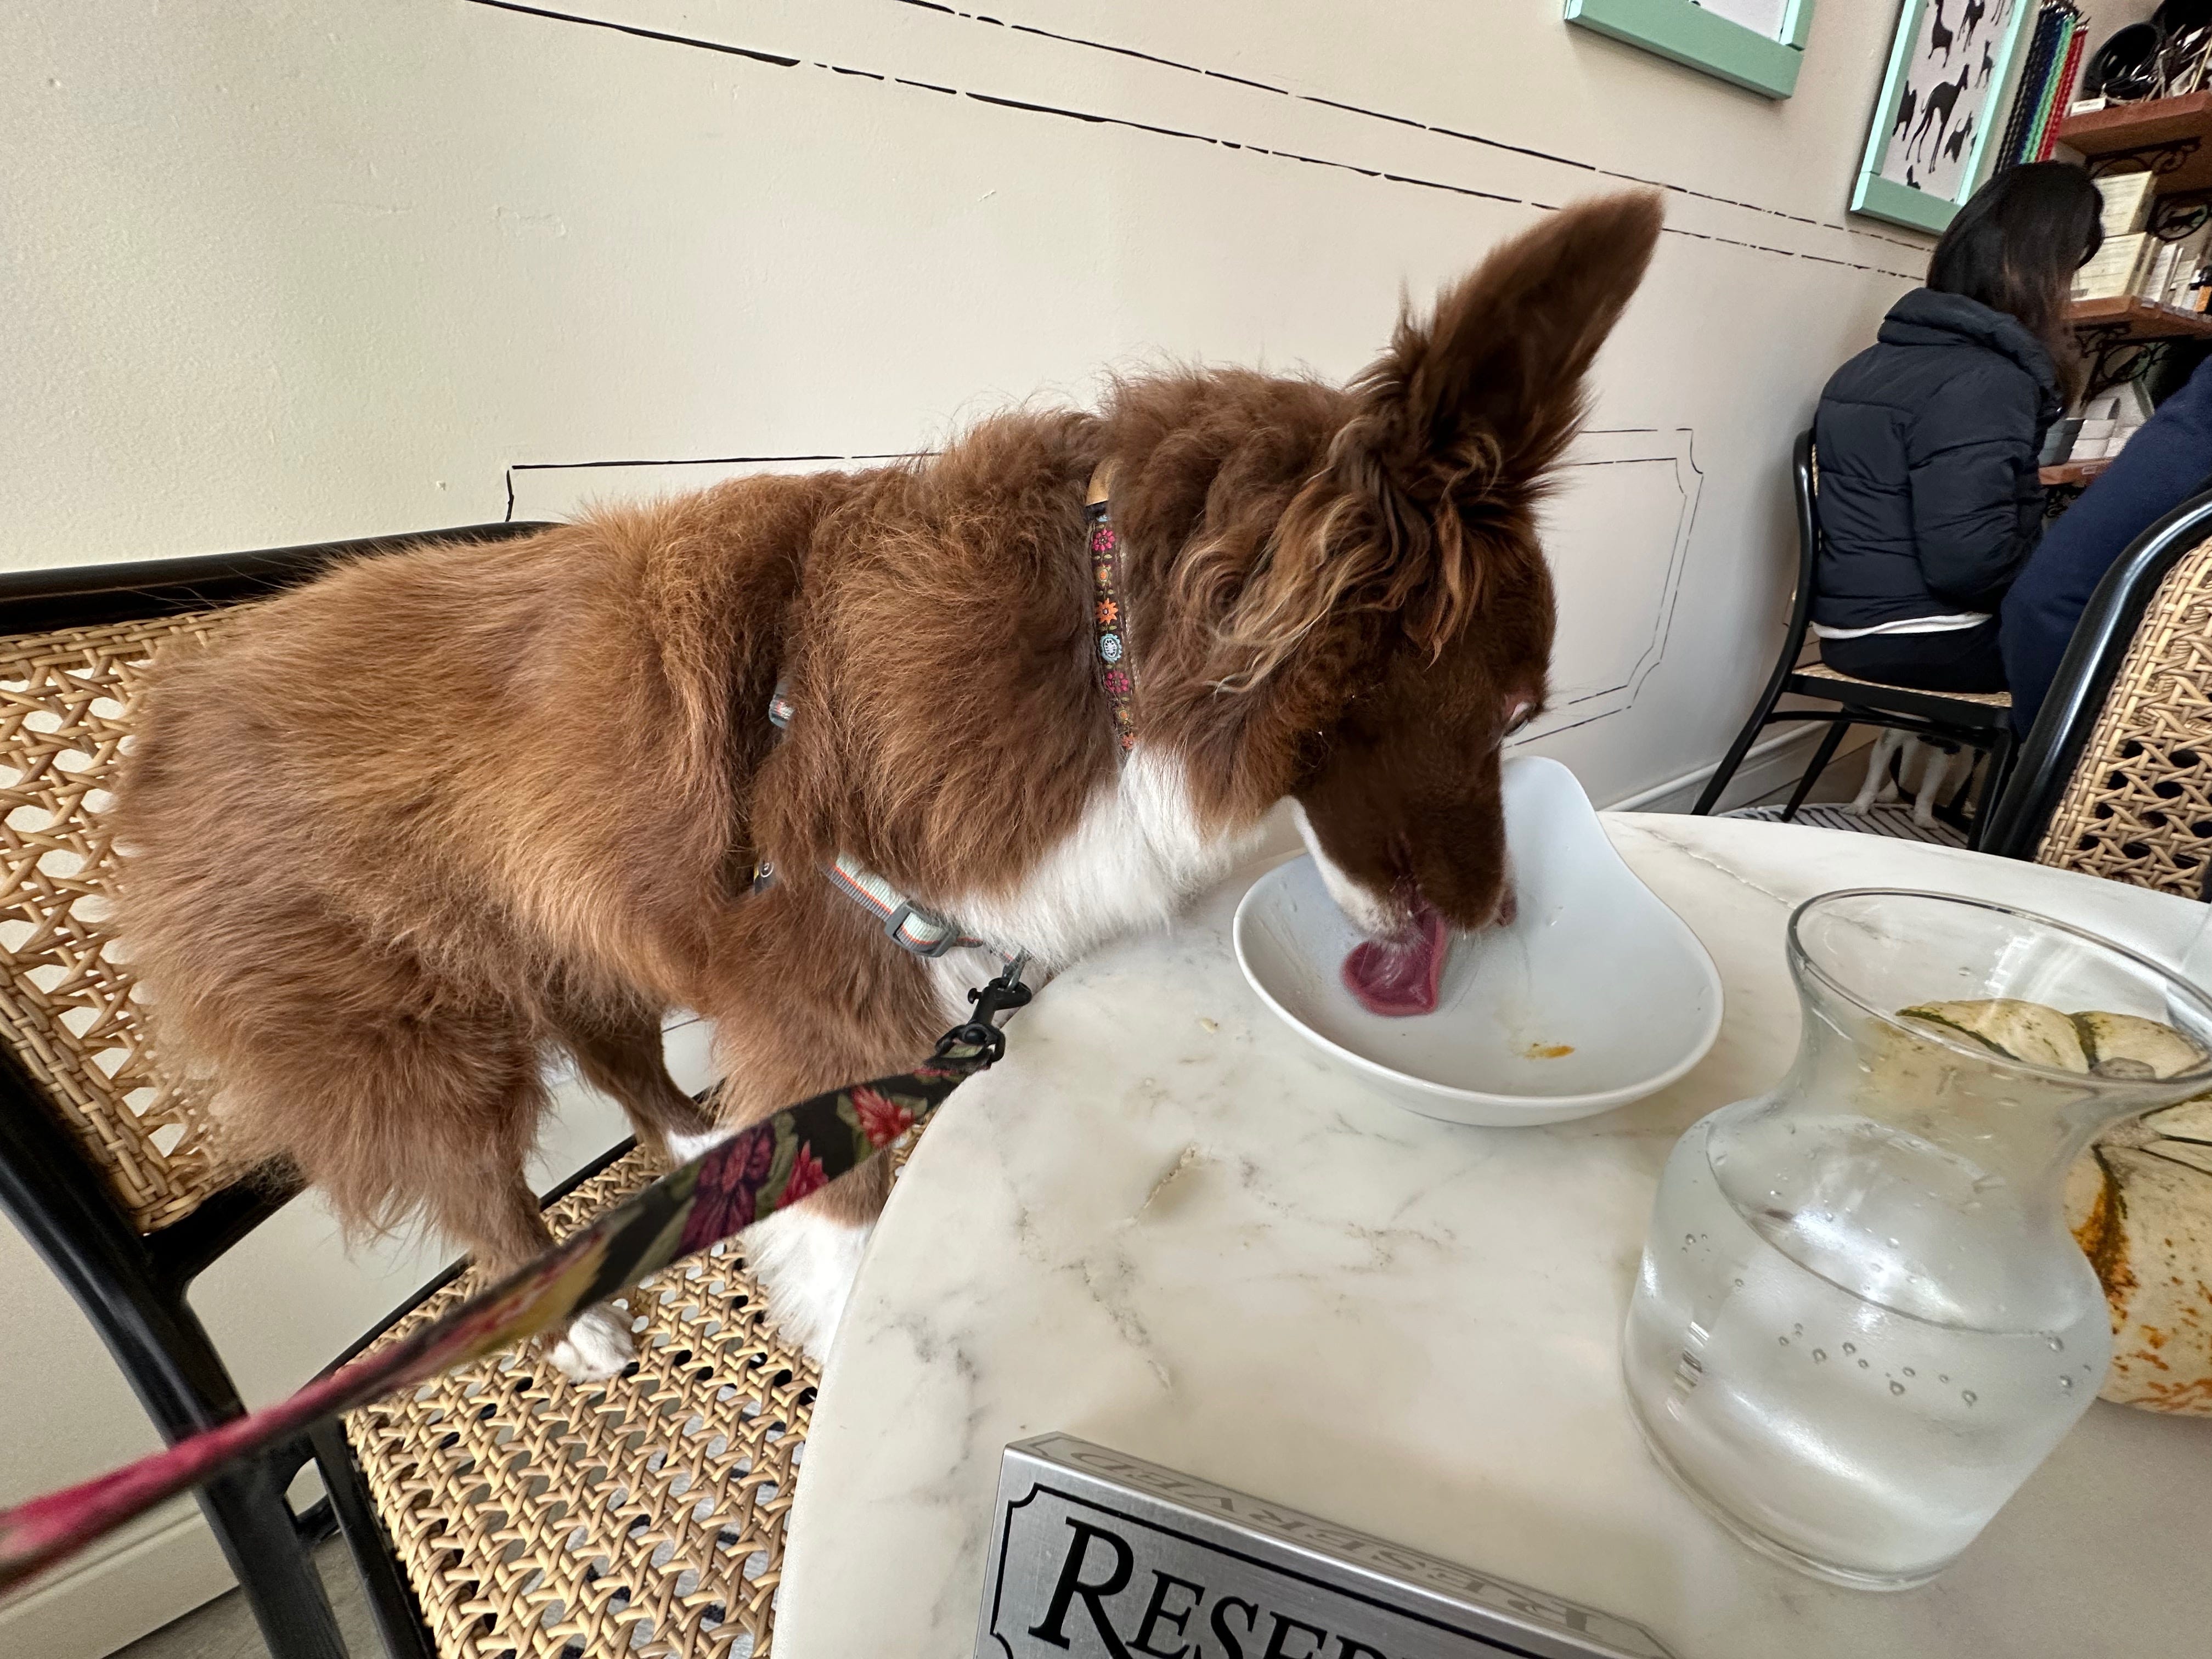 Heidi licks the bowl, fully comfortable in her new role as restaurant diner.